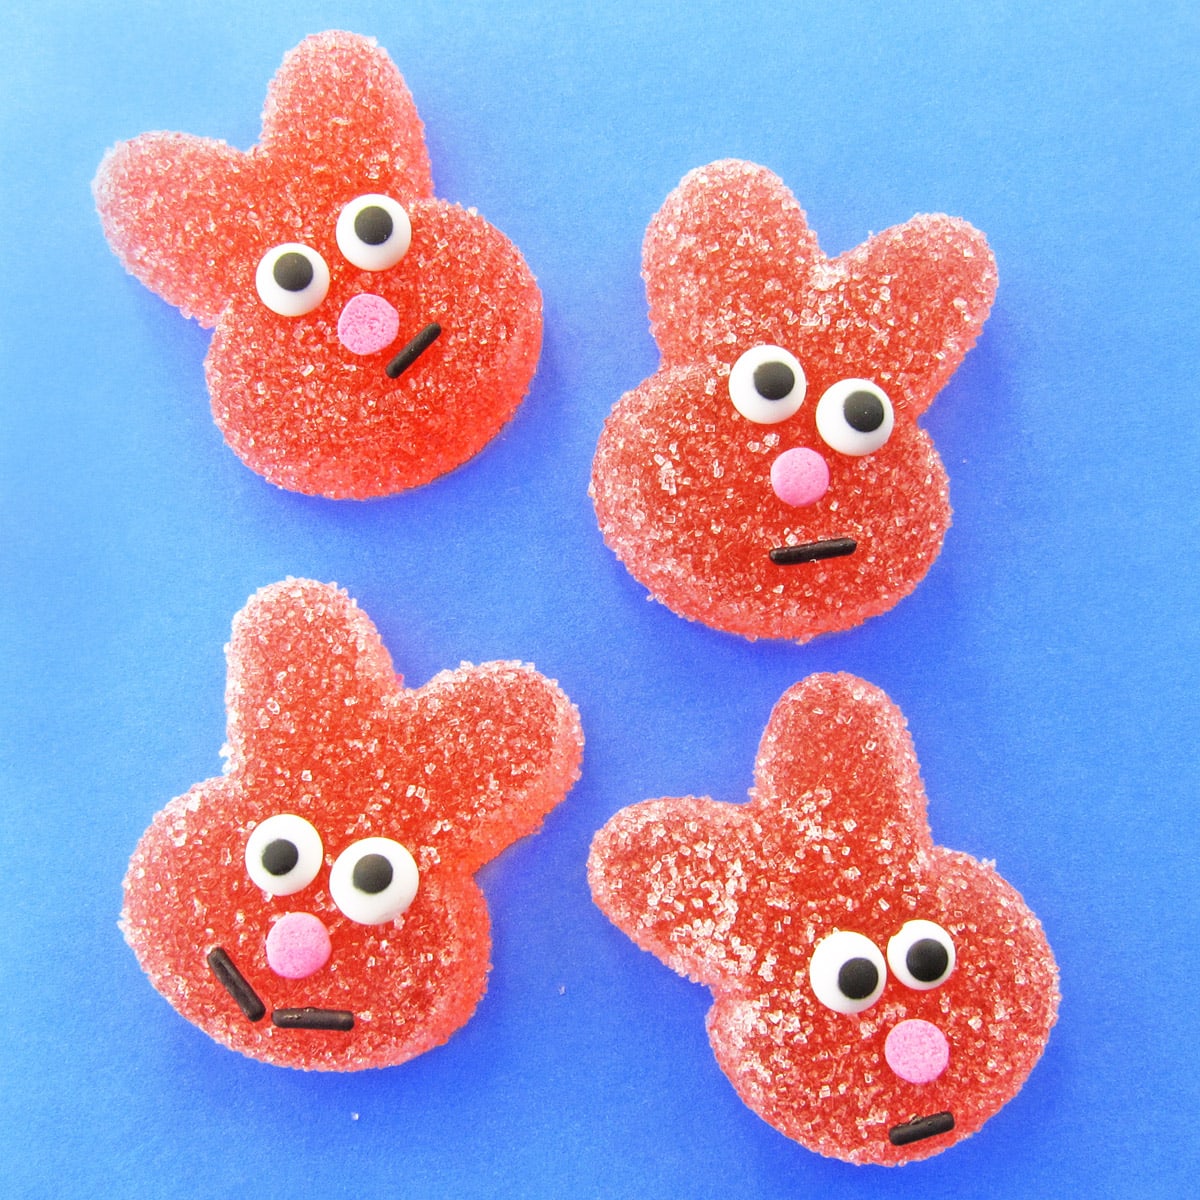 homemade sour gummy bunnies with candy eyes, a pink sprinkle nose, and a black jimmy smile.